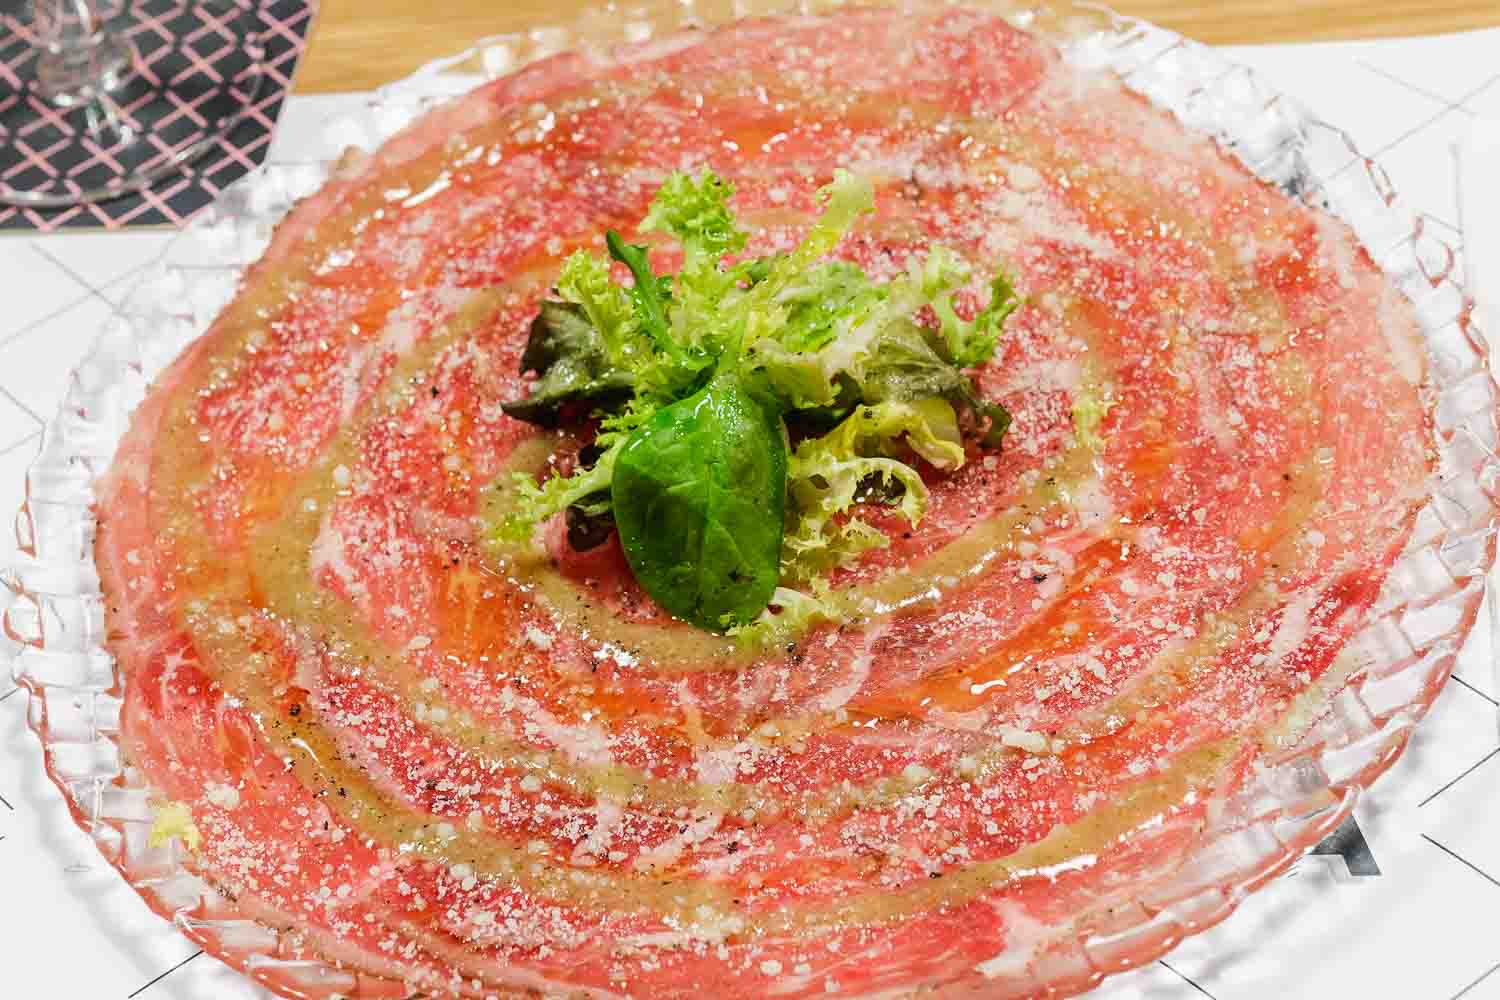 Carpaccio of Iberian pork shoulder with aroma of sage and Parmesan cheese